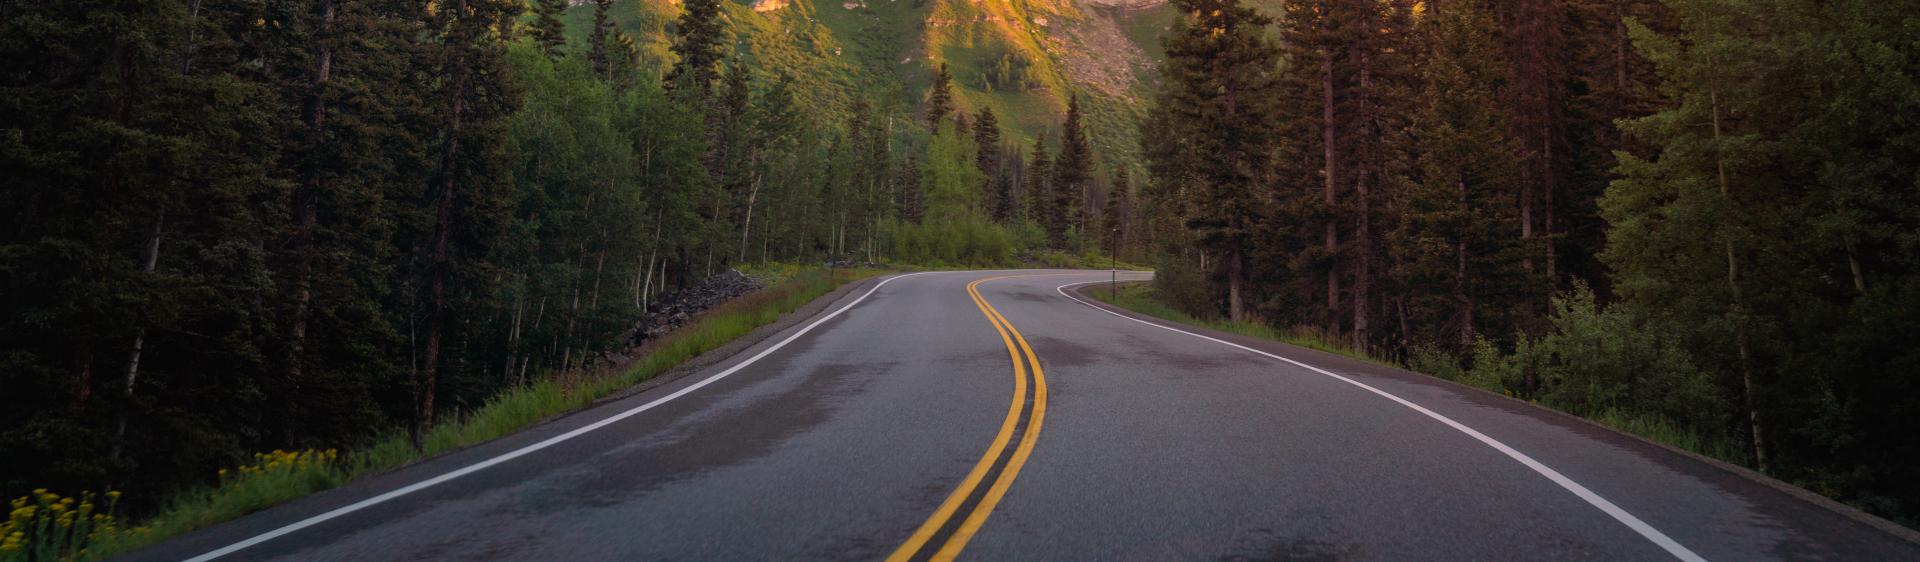 How to Spend the Weekend on Colorado's Million Dollar Highway - Outside  Online